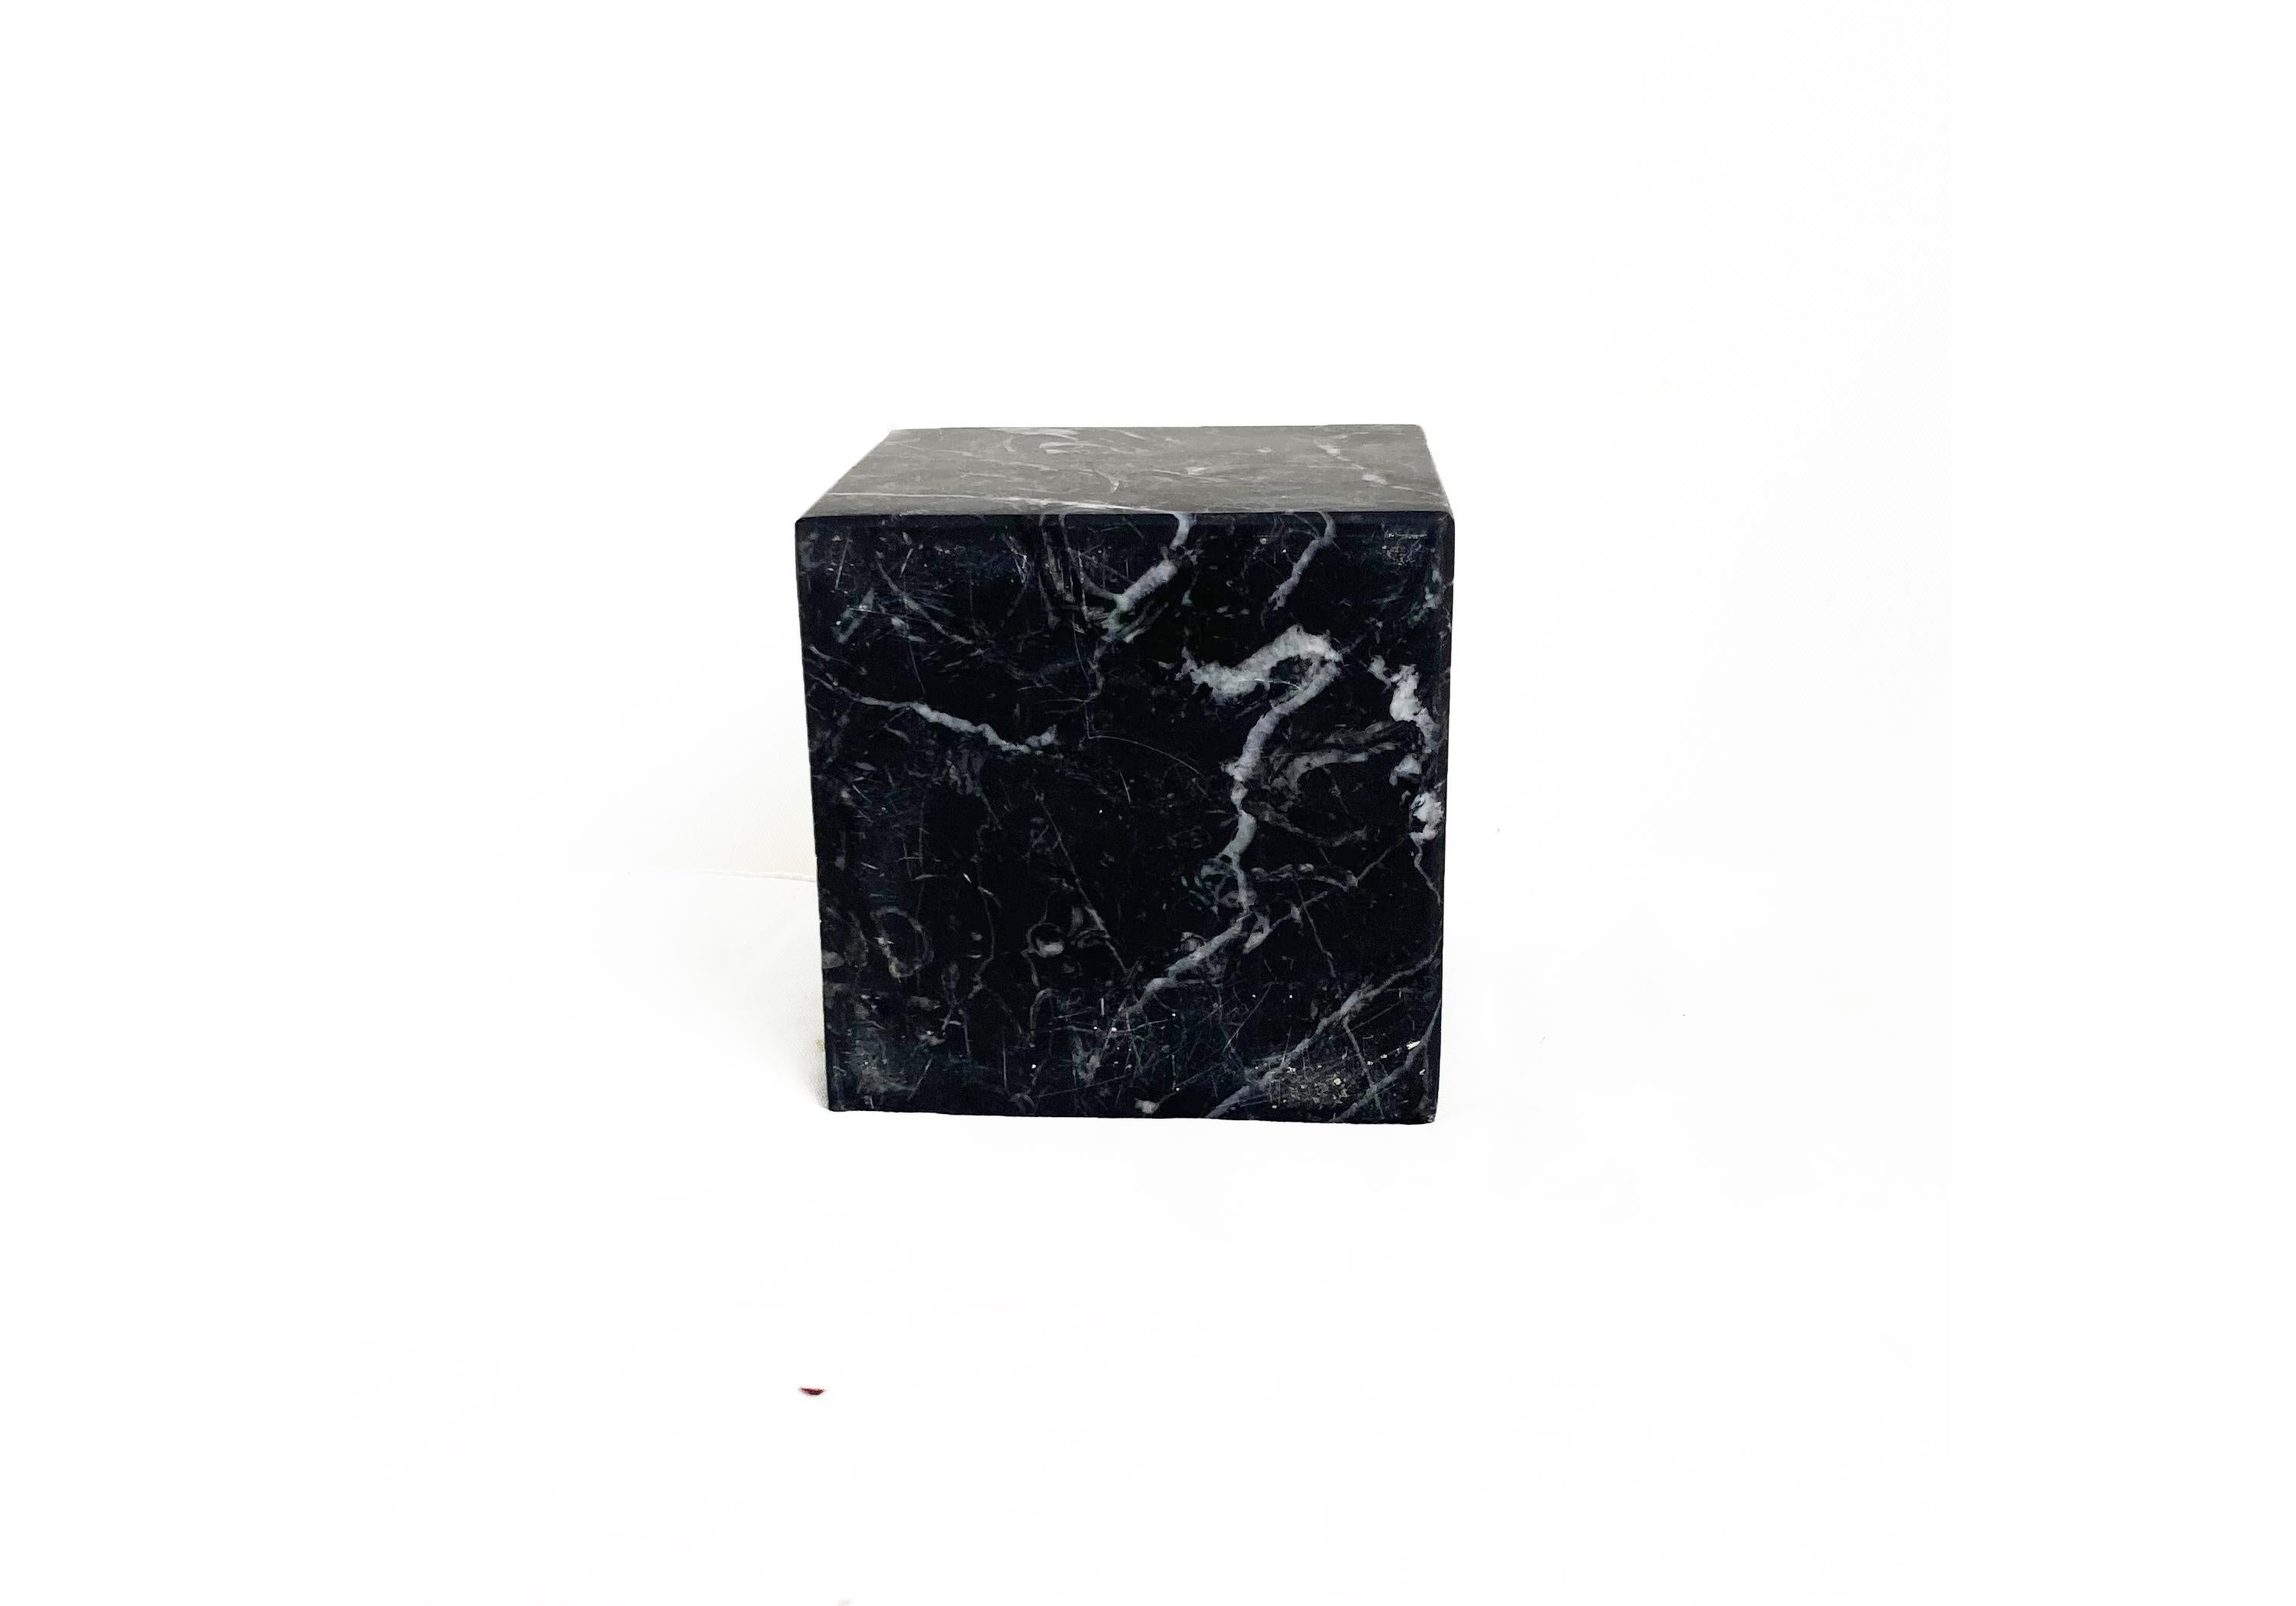 A blocks of precious black Marquina marble precision machine carved and hand polished. The cube can be use as book-end, door-stop or simply a sculpture on your desk or shelf. A sort of philosophical stone, absorbing your thoughts and making you